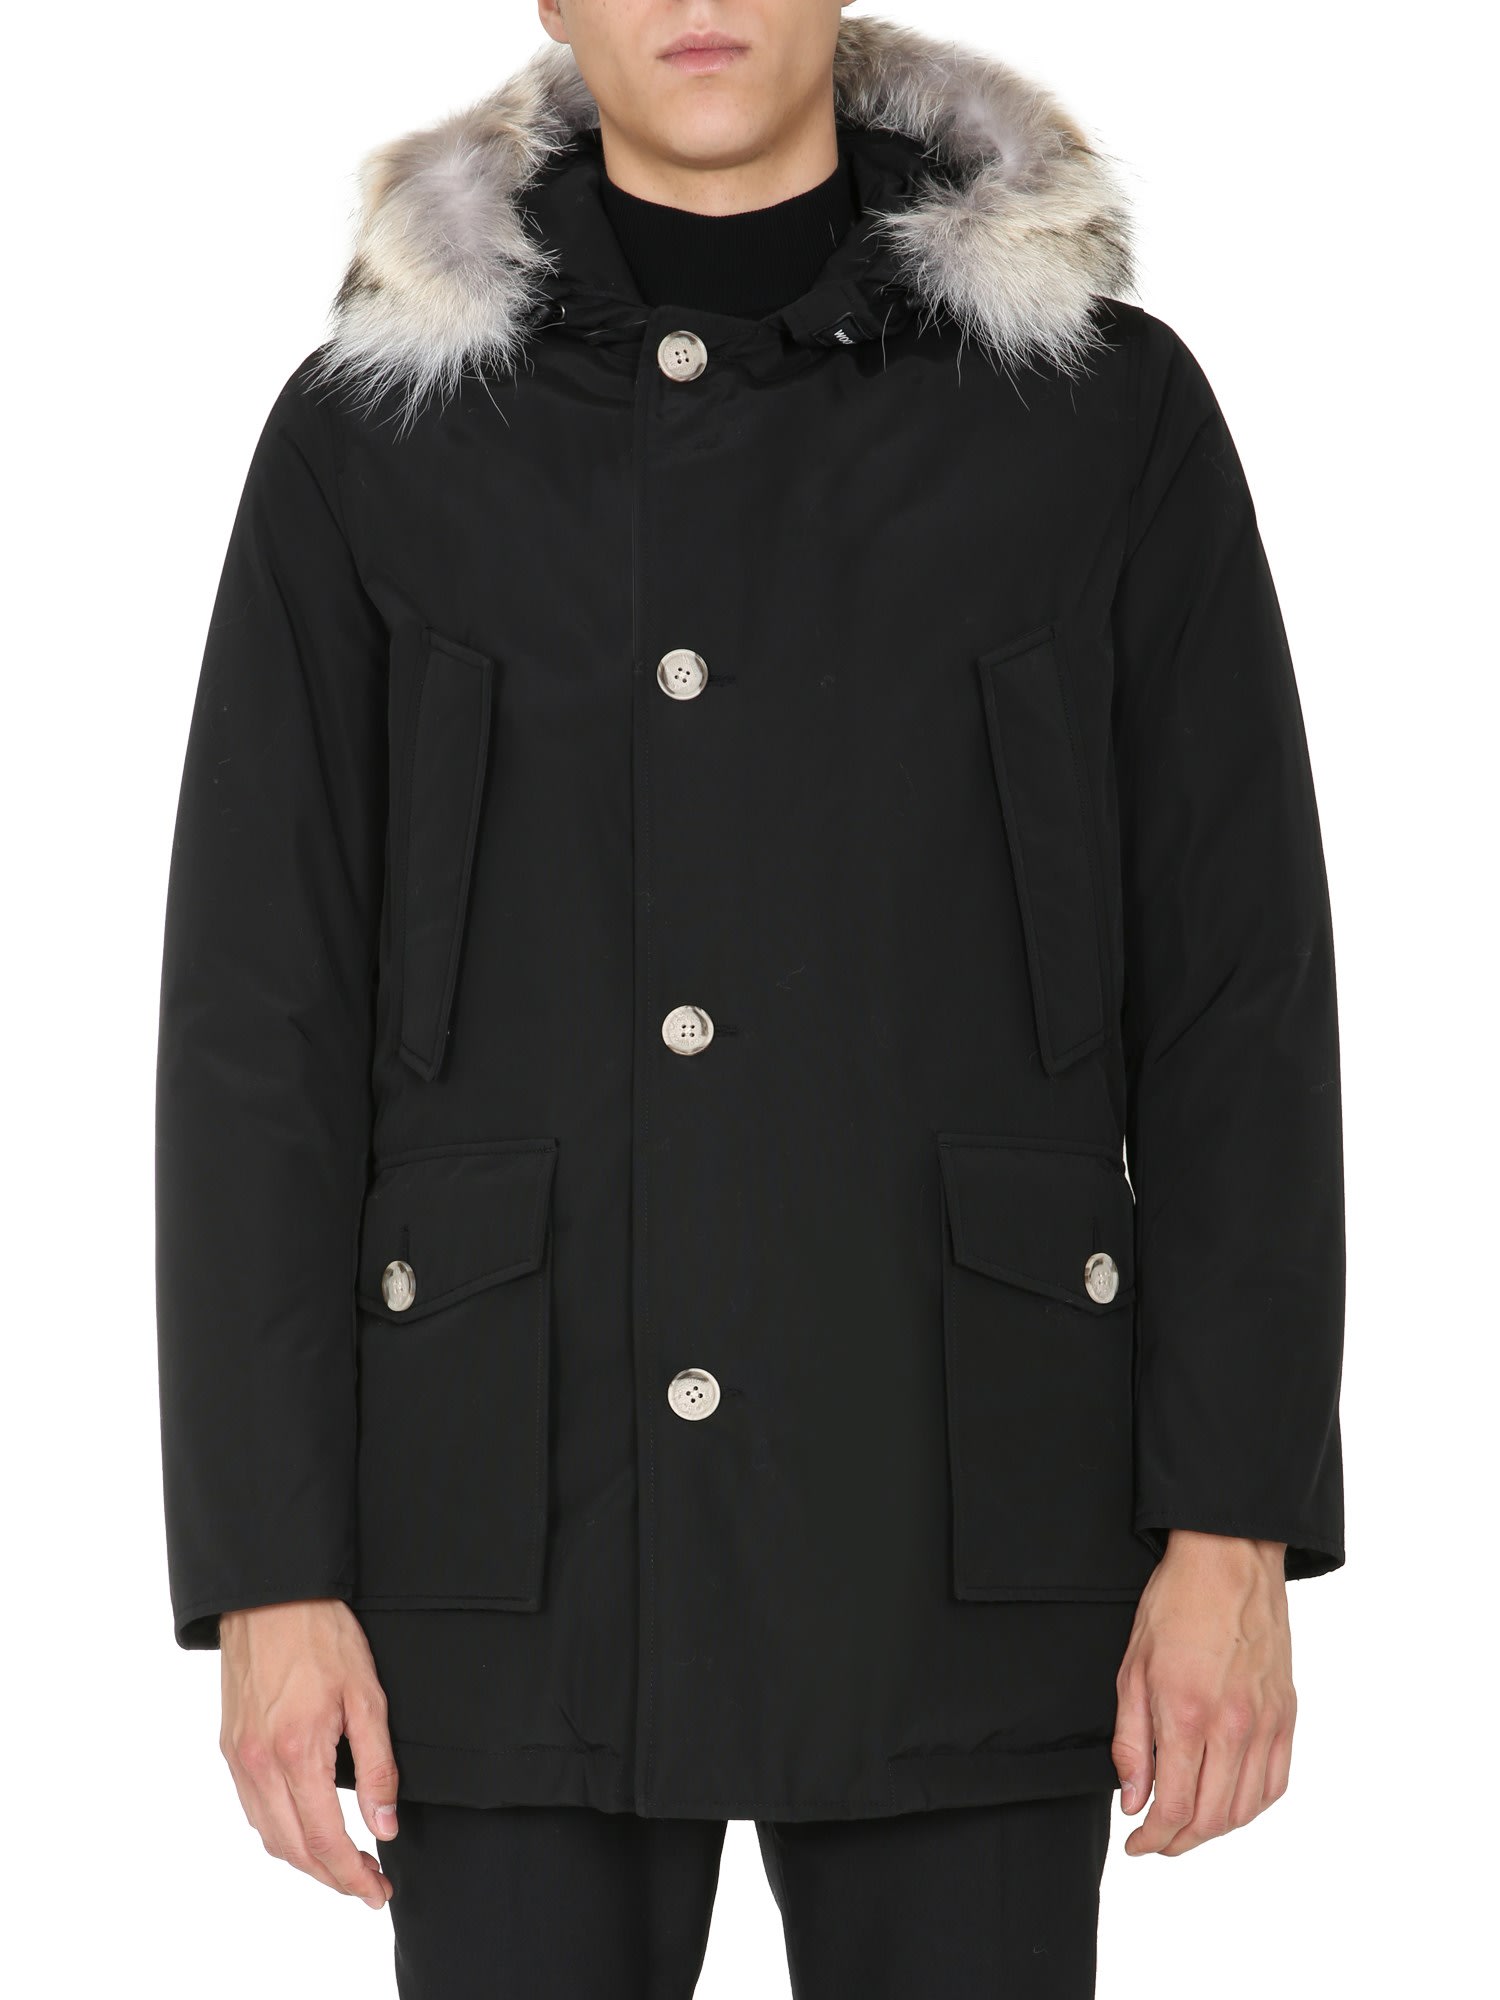 WOOLRICH ARCTIC DOWN JACKET